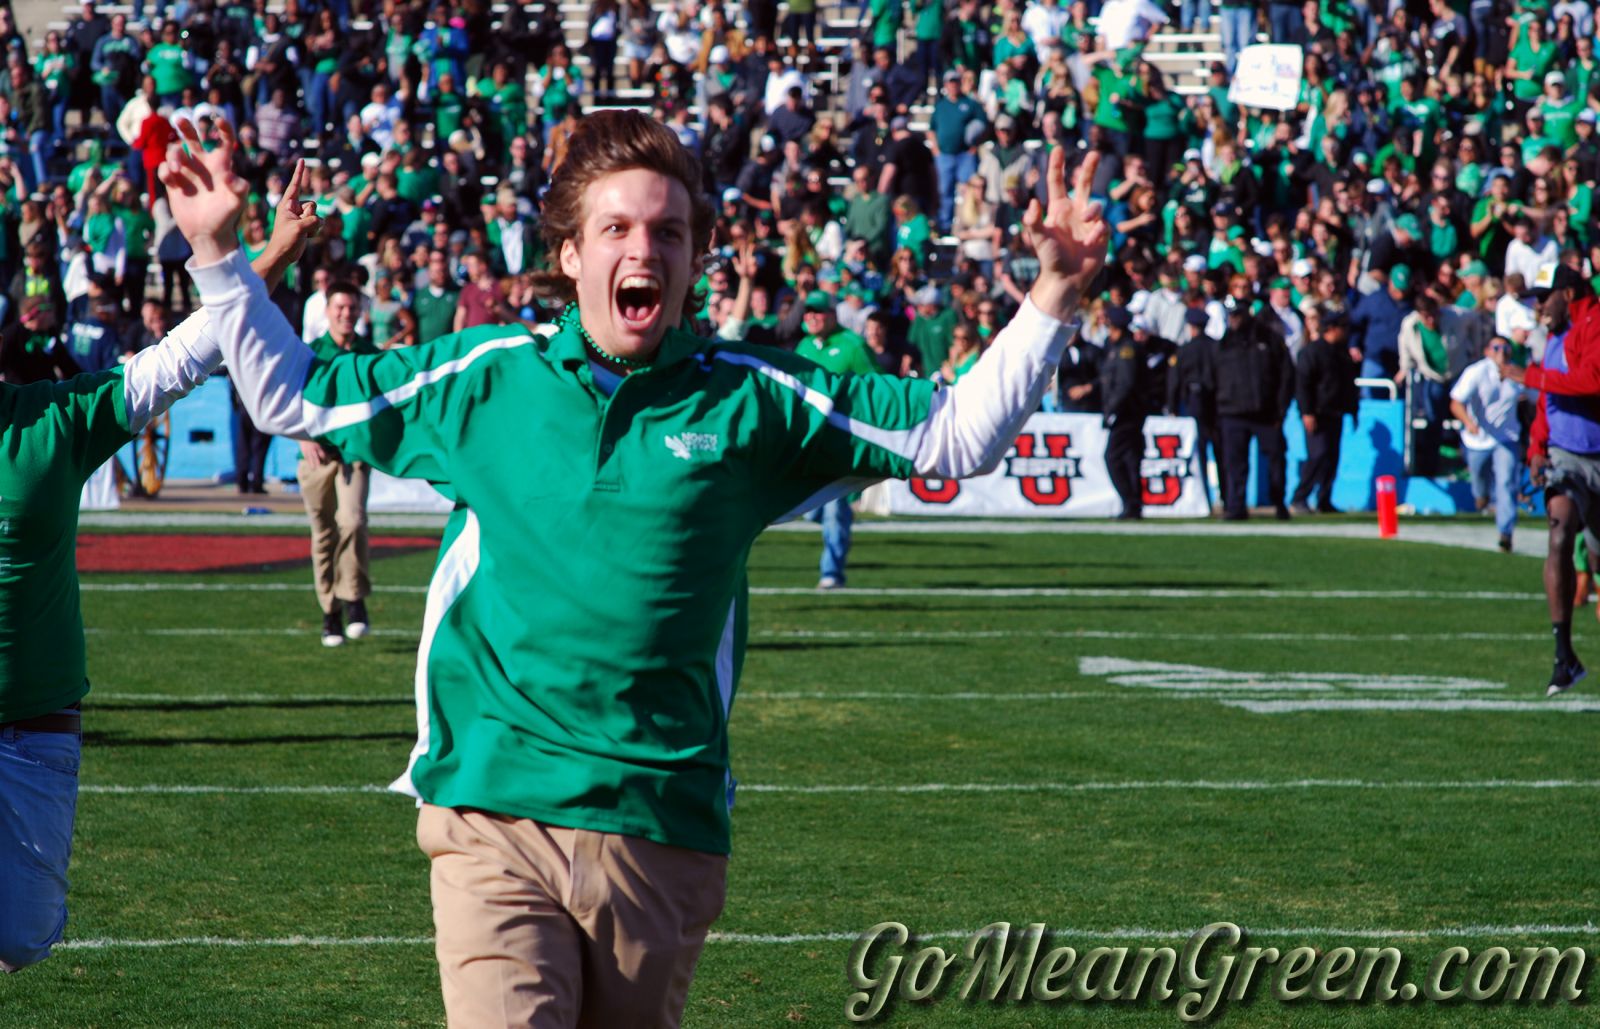 UNT students rush the Cotton Bowl field